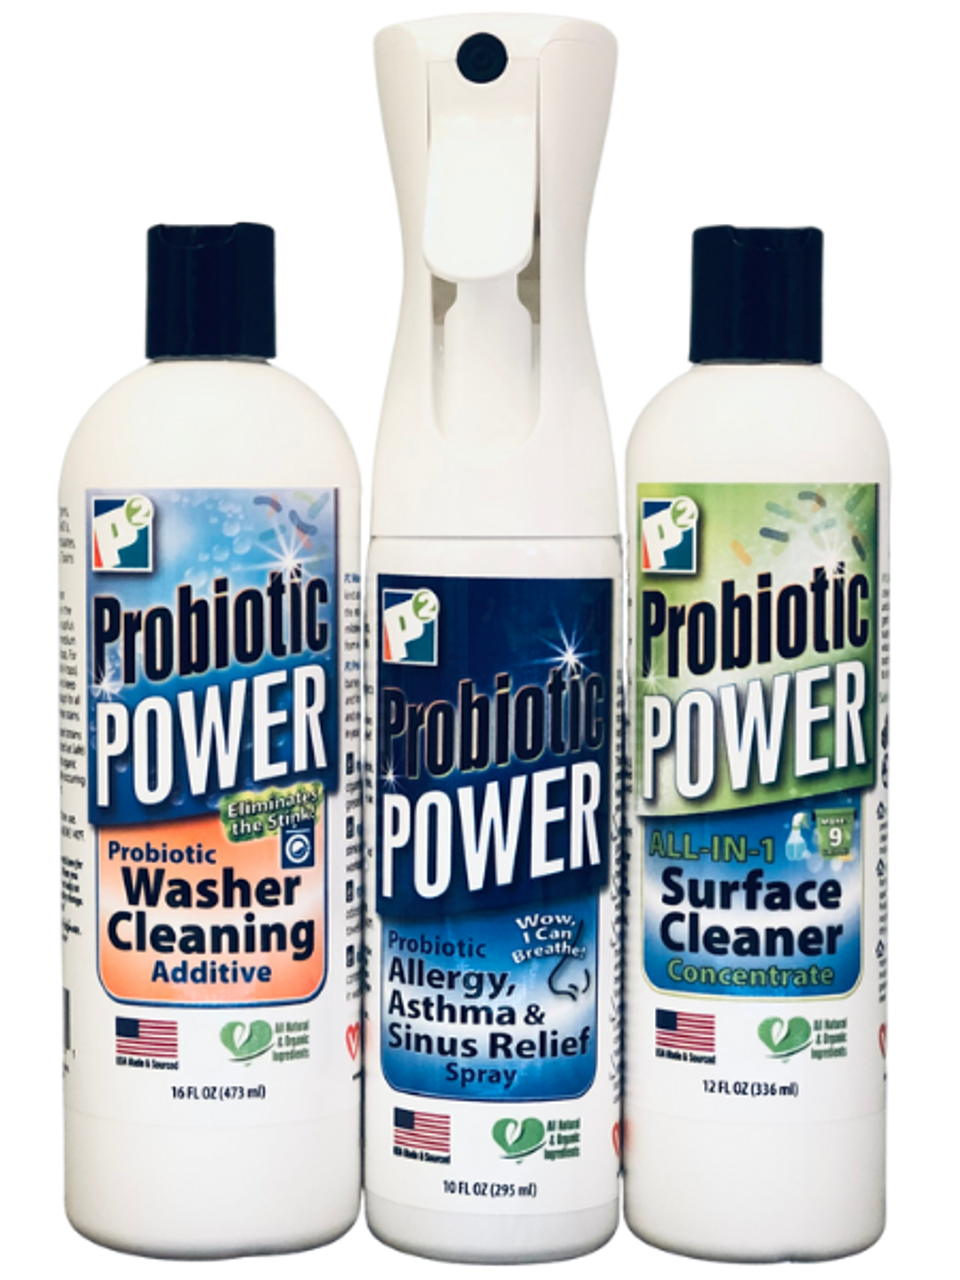 Probiotic Cleaners: What Are They, How to Use Them & Do They Work?